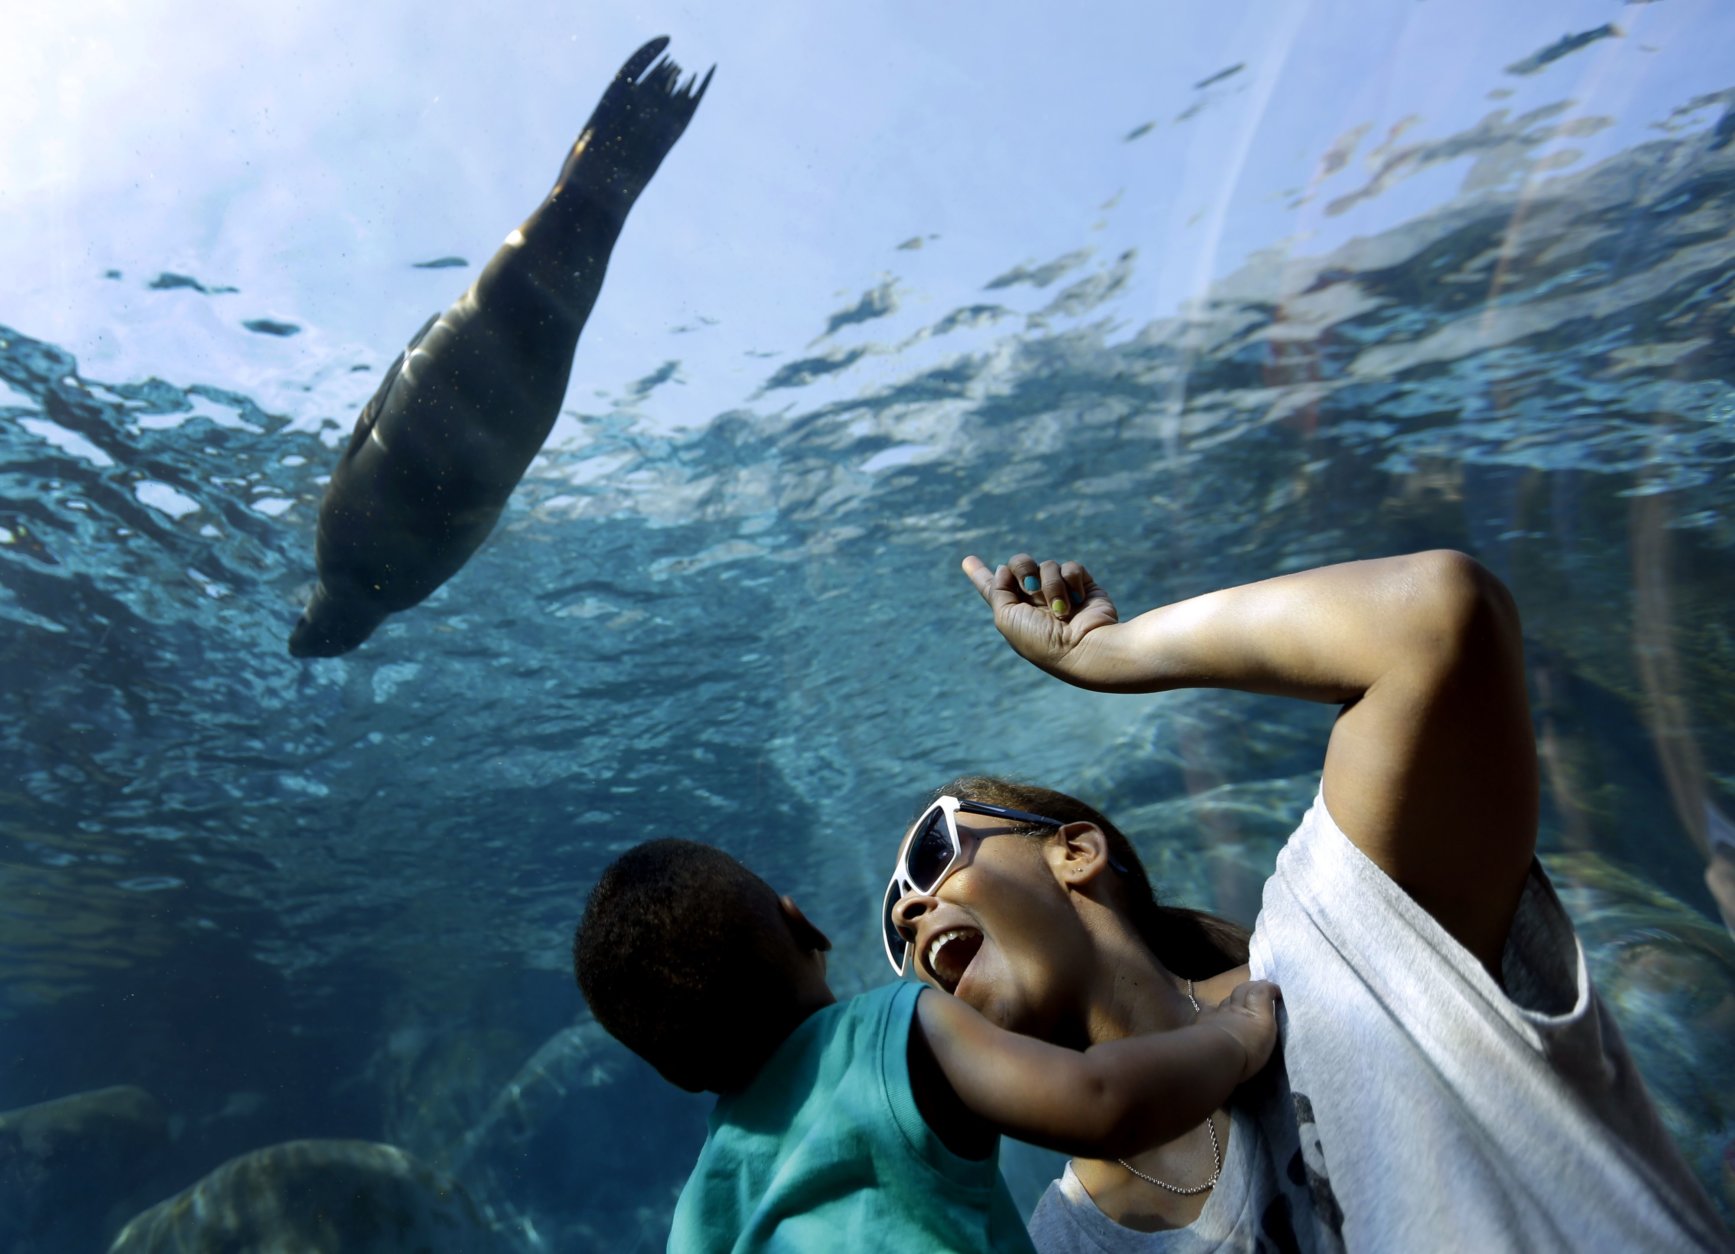 Danielle Kennedy and her son Kingston, 1, watch as a sea lion swims overhead in a Saint Louis Zoo exhibit Thursday, Sept. 5, 2013, in St. Louis. In the exhibit, visitors walk through an underwater tunnel to watch as sea lions frolic overhead and all around. (AP Photo/Jeff Roberson)